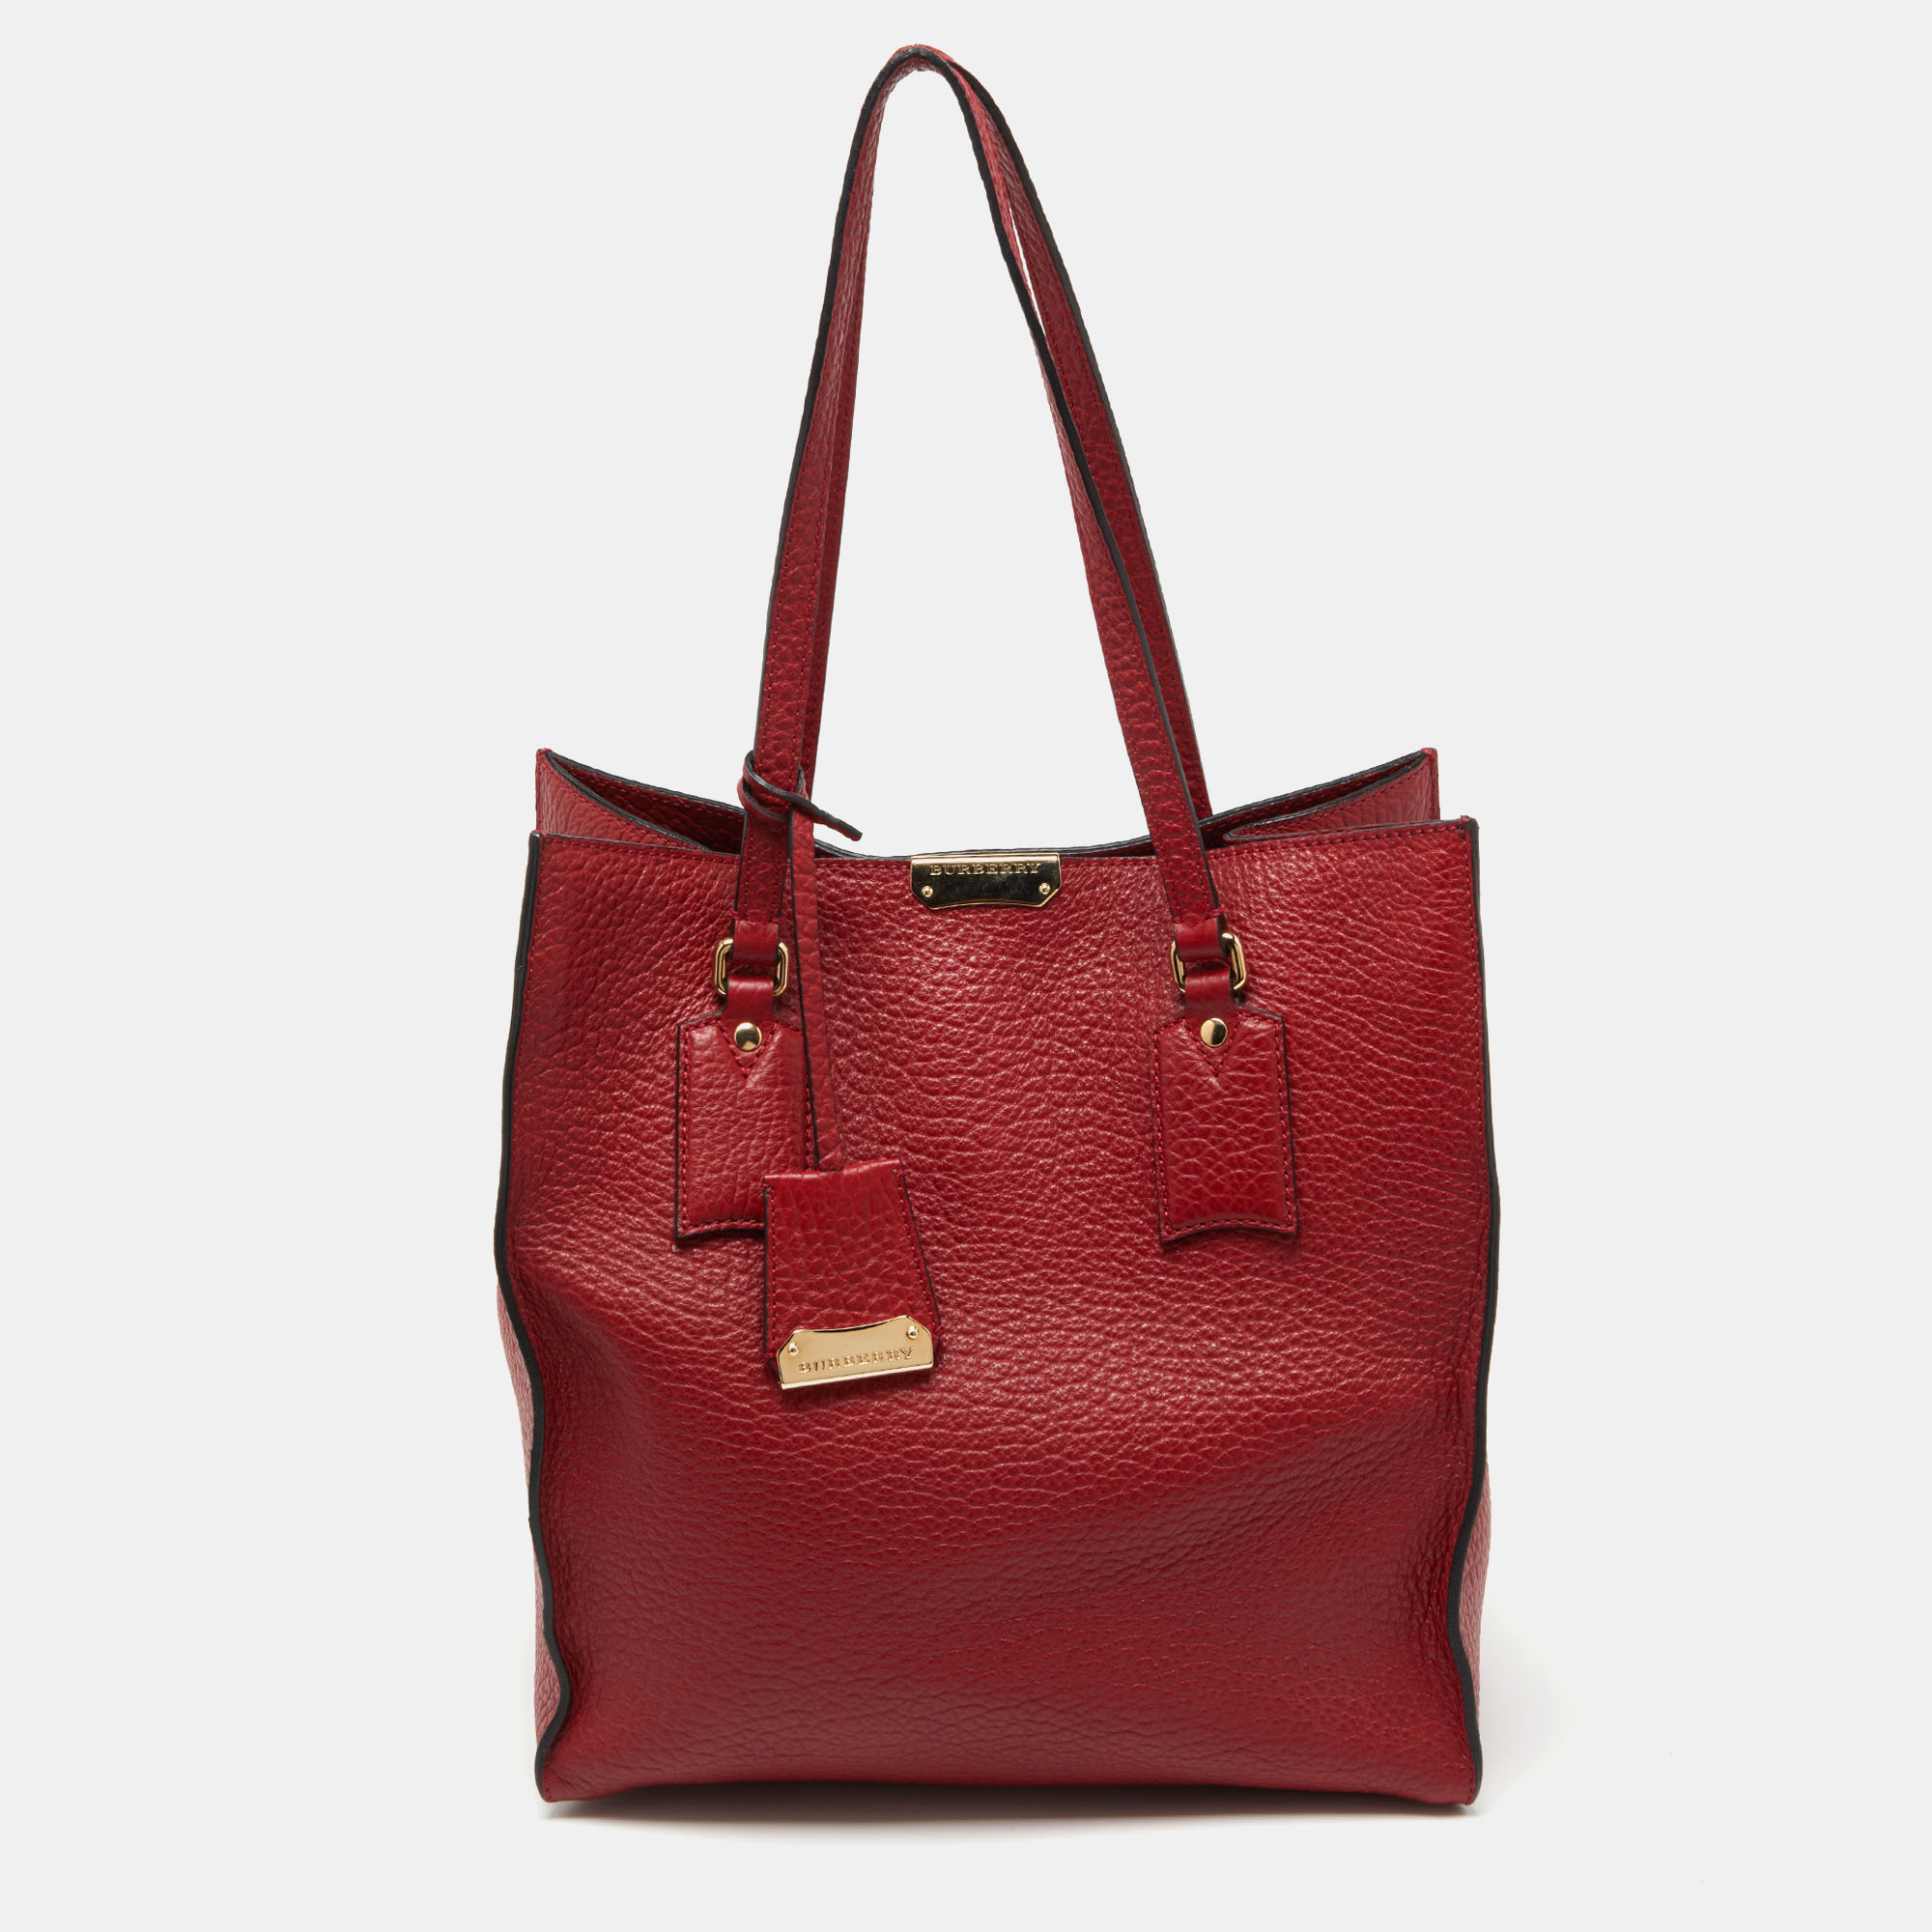 Indulge in timeless luxury with this Burberry red bag. Meticulously handcrafted this iconic piece combines heritage elegance and craftsmanship elevating your style to a level of unmatched sophistication.